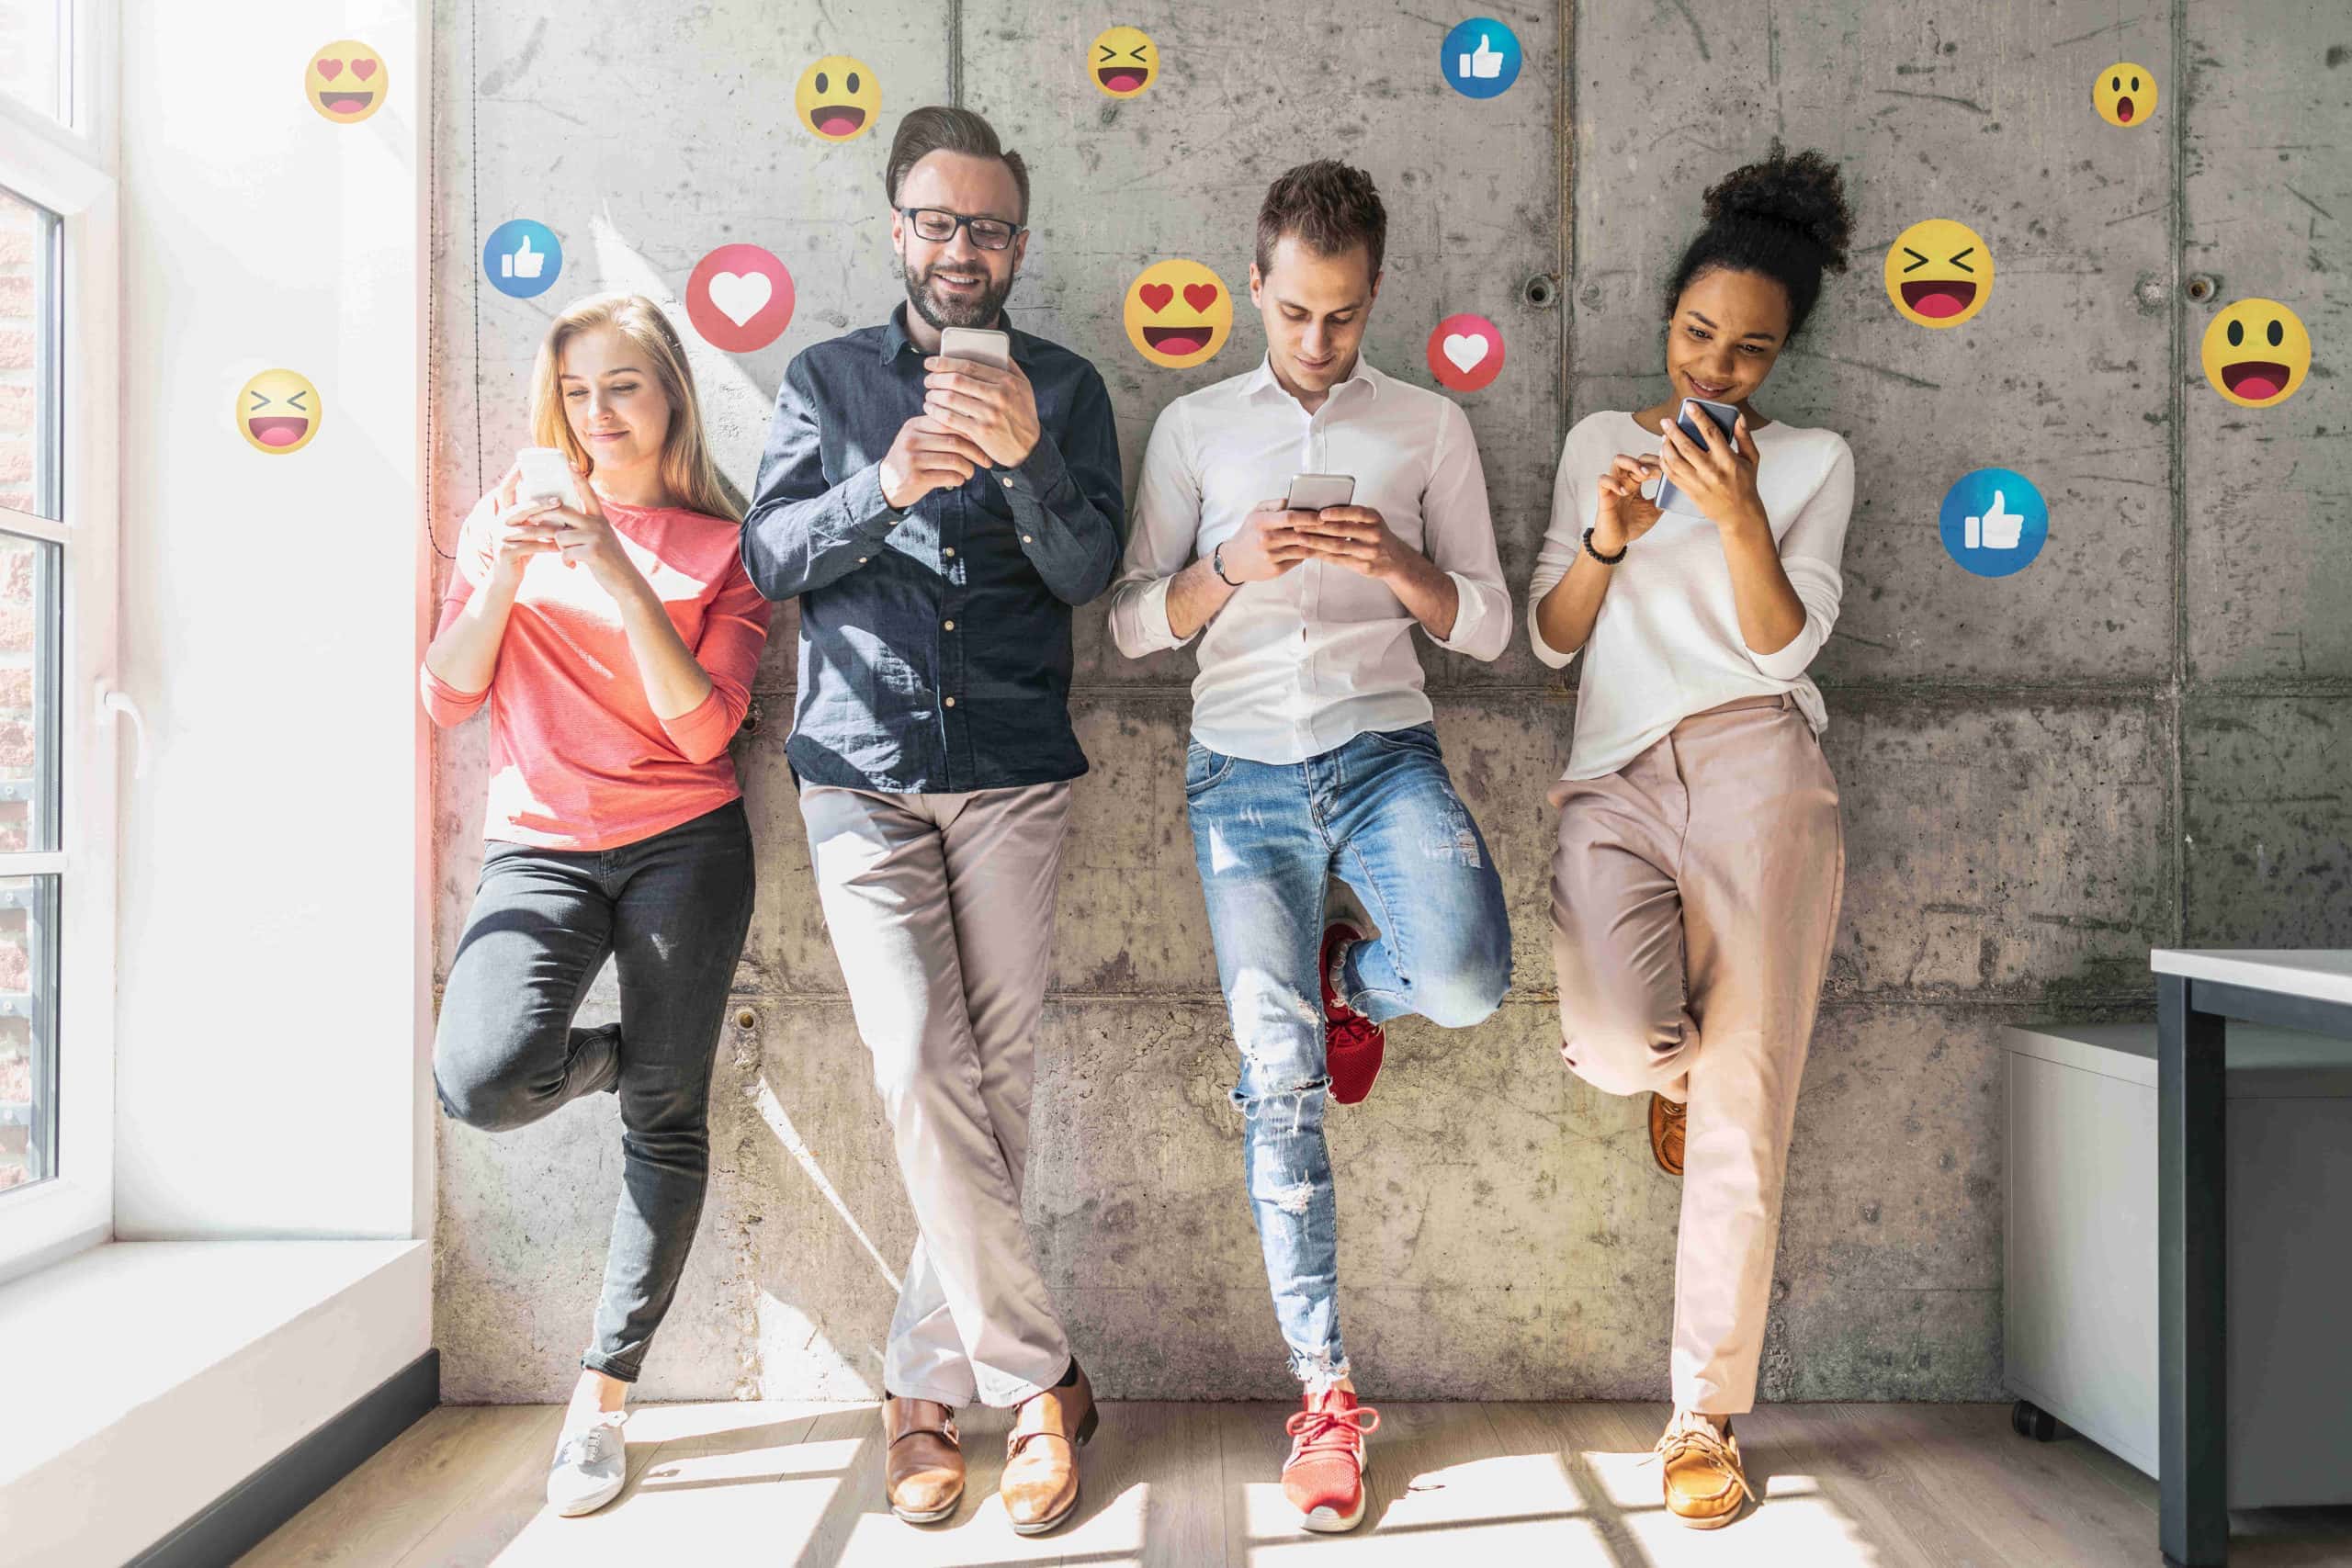 four people on their phones surrounded by facebook emojis